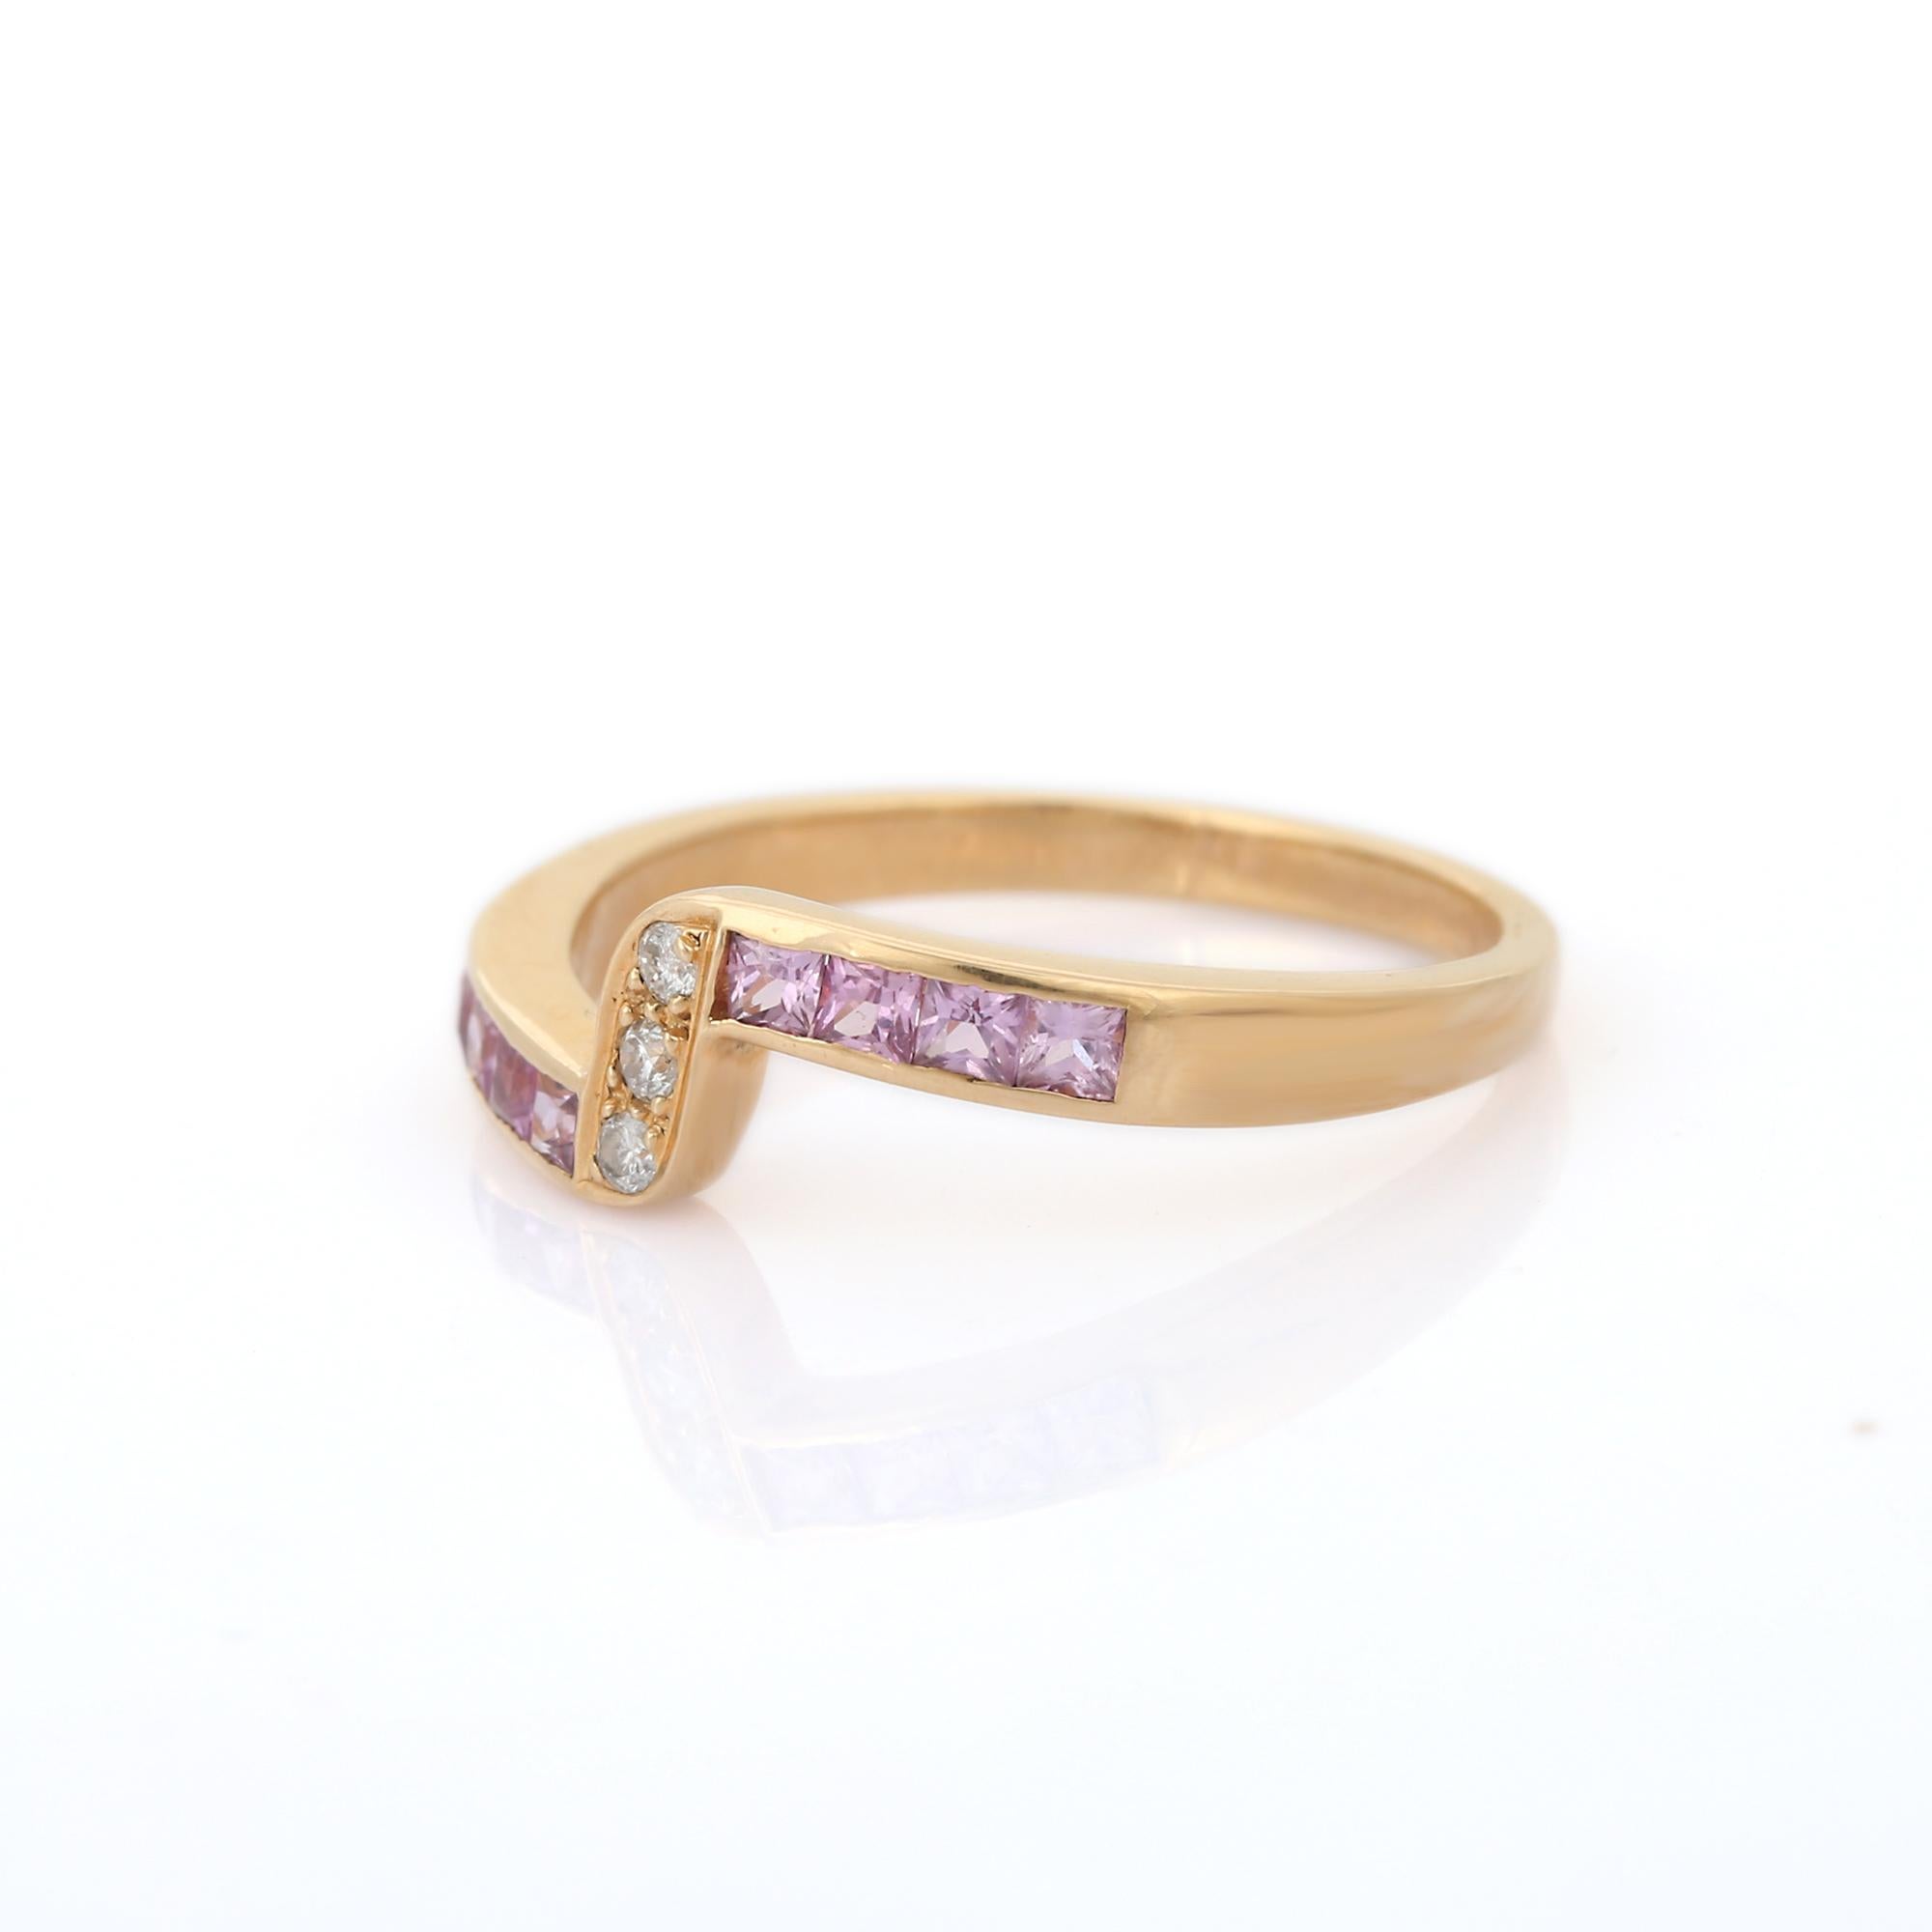 For Sale:  Genuine Diamond and Pink Sapphire Stackable Ring in 14K Yellow Gold 3